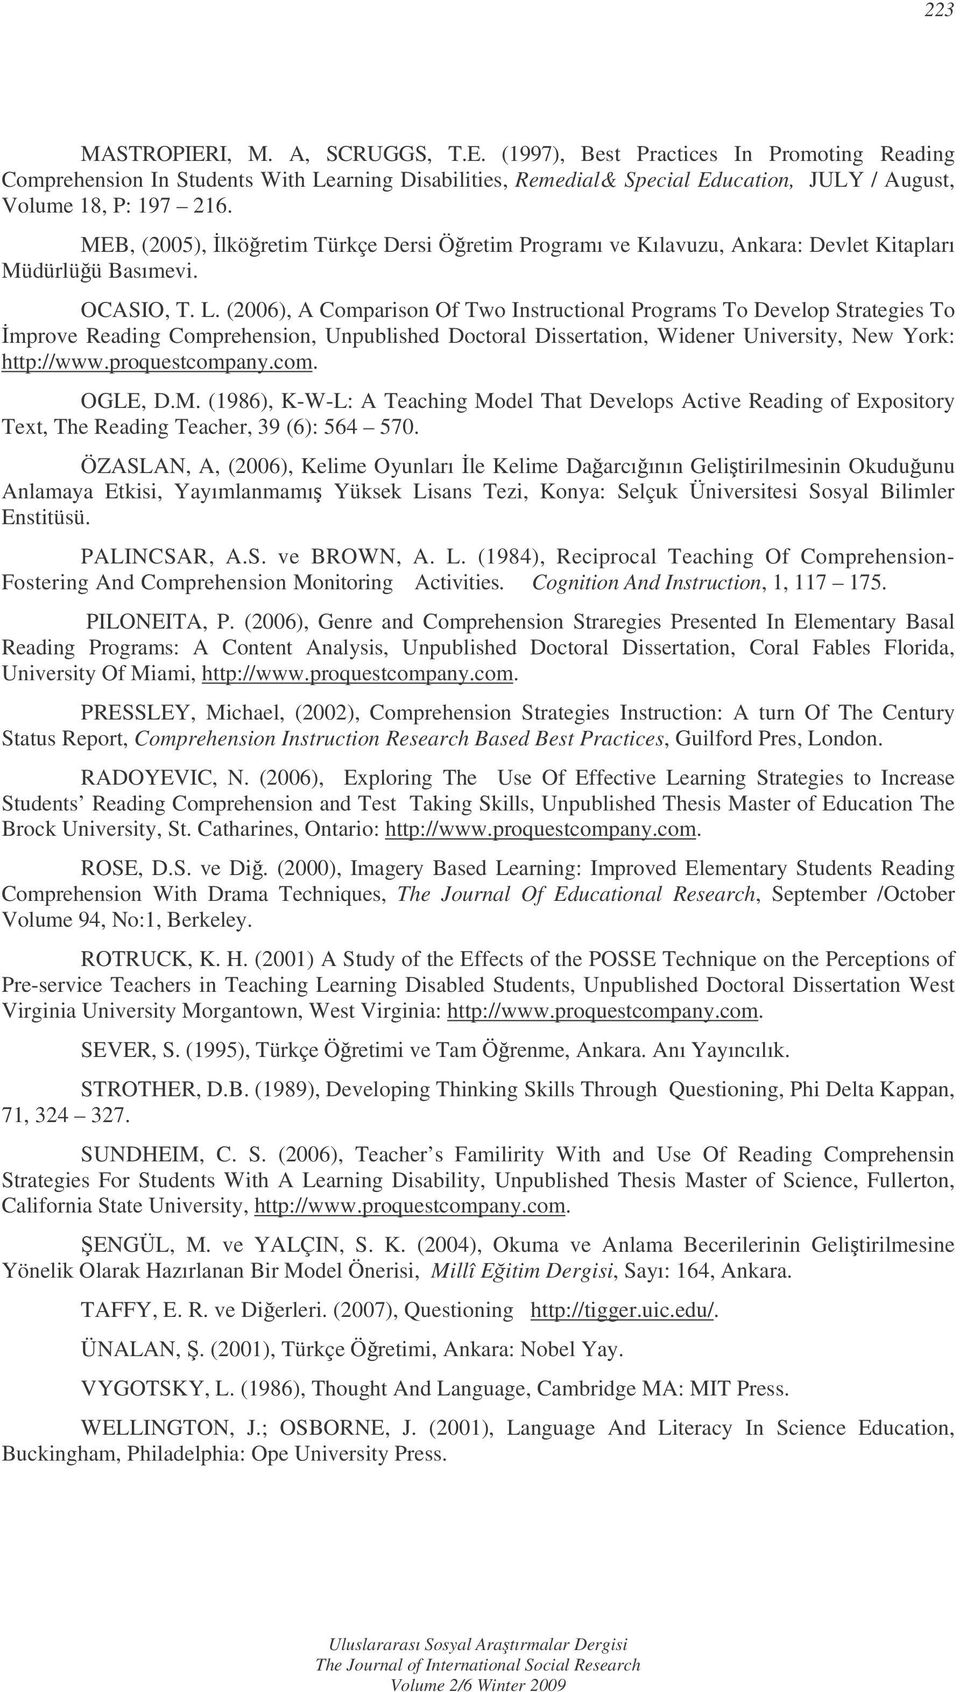 (2006), A Comparison Of Two Instructional Programs To Develop Strategies To mprove Reading Comprehension, Unpublished Doctoral Dissertation, Widener University, New York: http://www.proquestcompany.